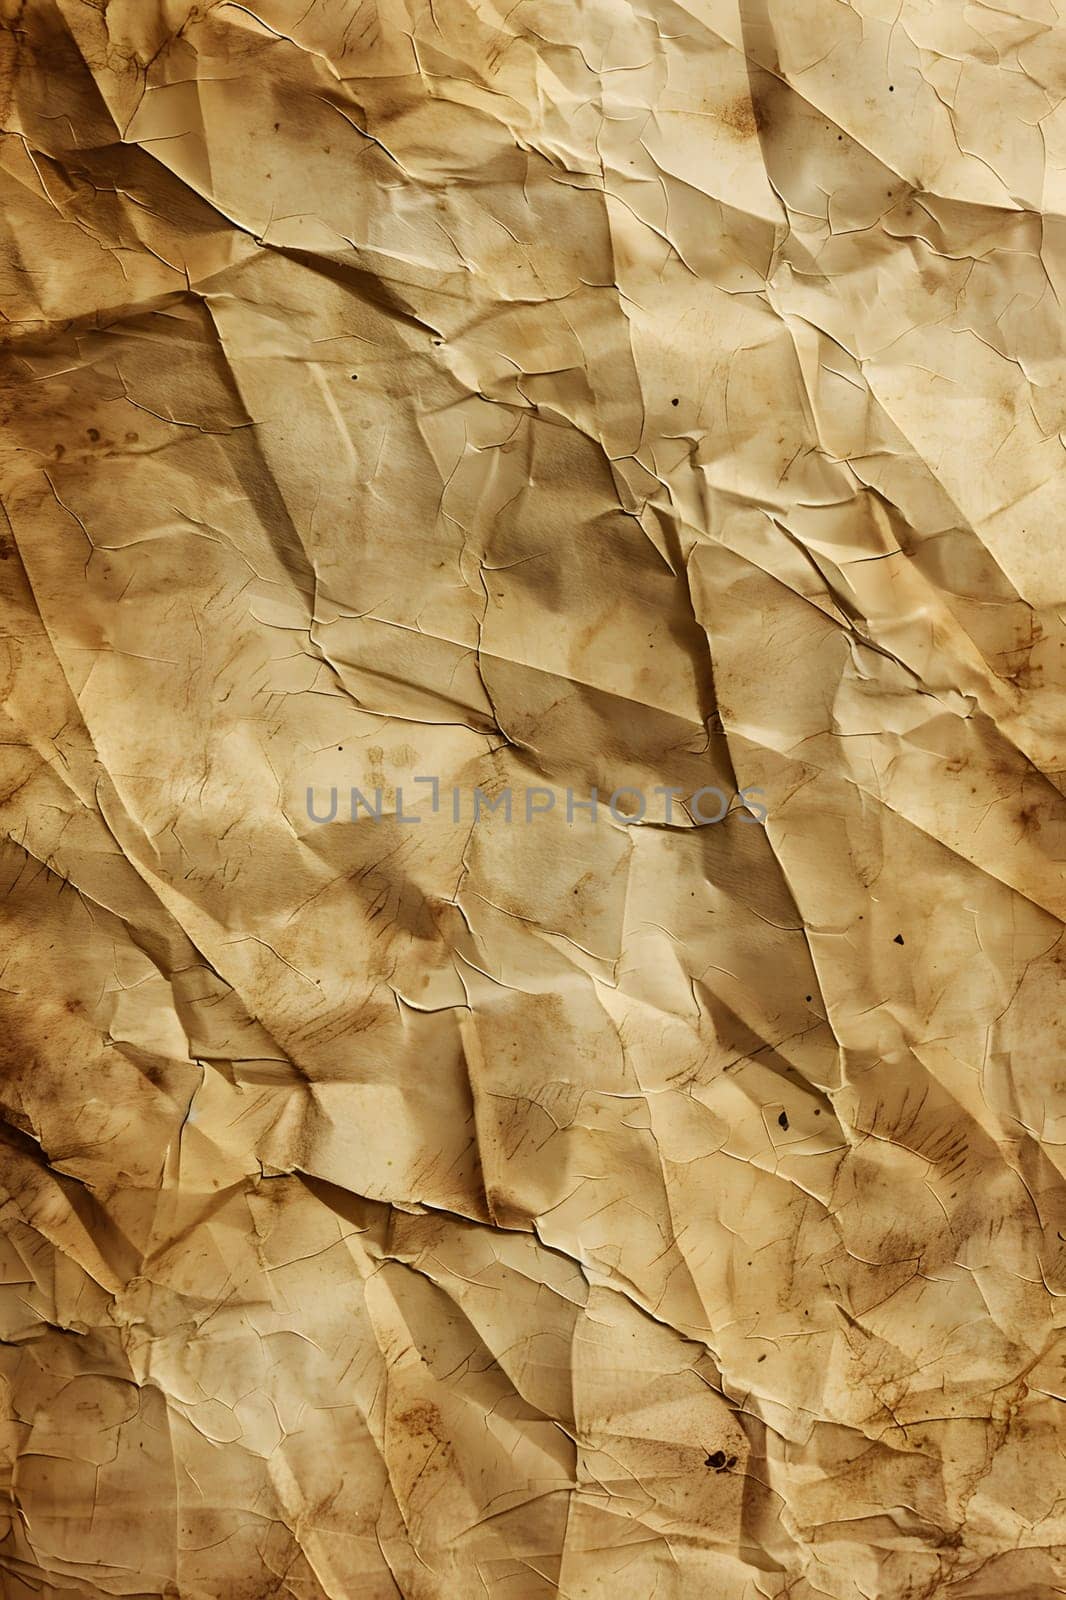 Close up of crumpled brown paper, resembling bedrock formation by Nadtochiy